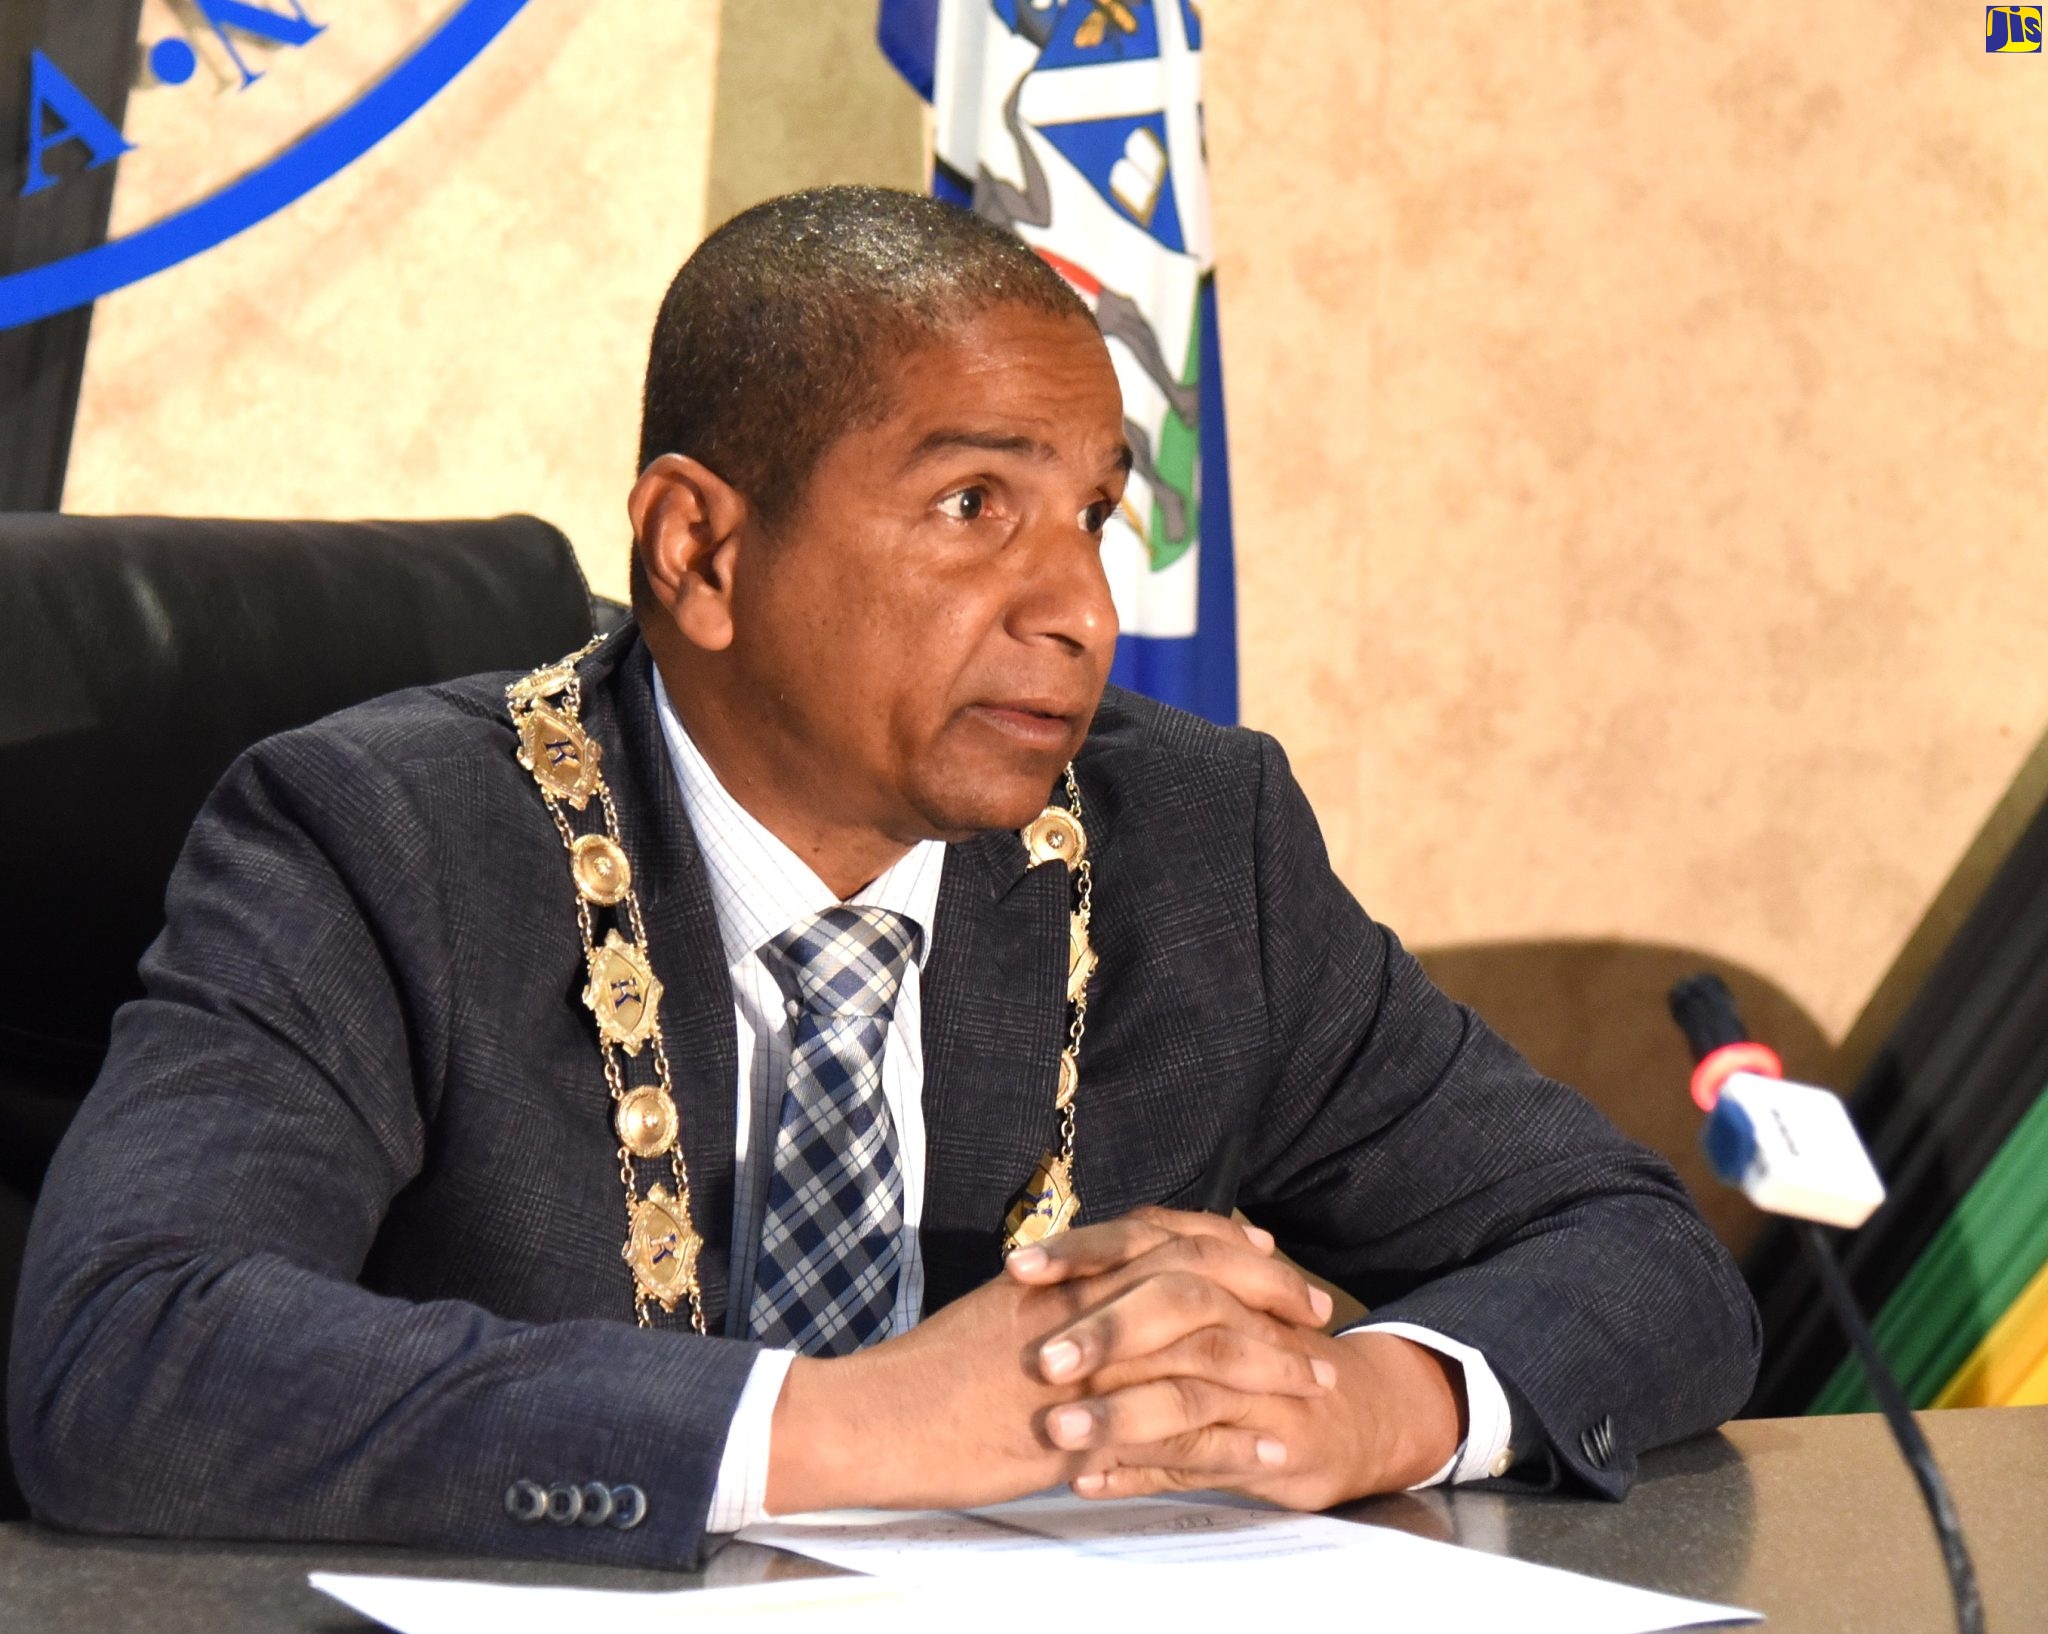 Mayor of Kingston, Senator Councillor Delroy Williams, addresses the monthly meeting of the Kingston and St. Andrew Municipal Corporation, held at the Corporation’s offices on Church Street in downtown Kingston, on April 11.

